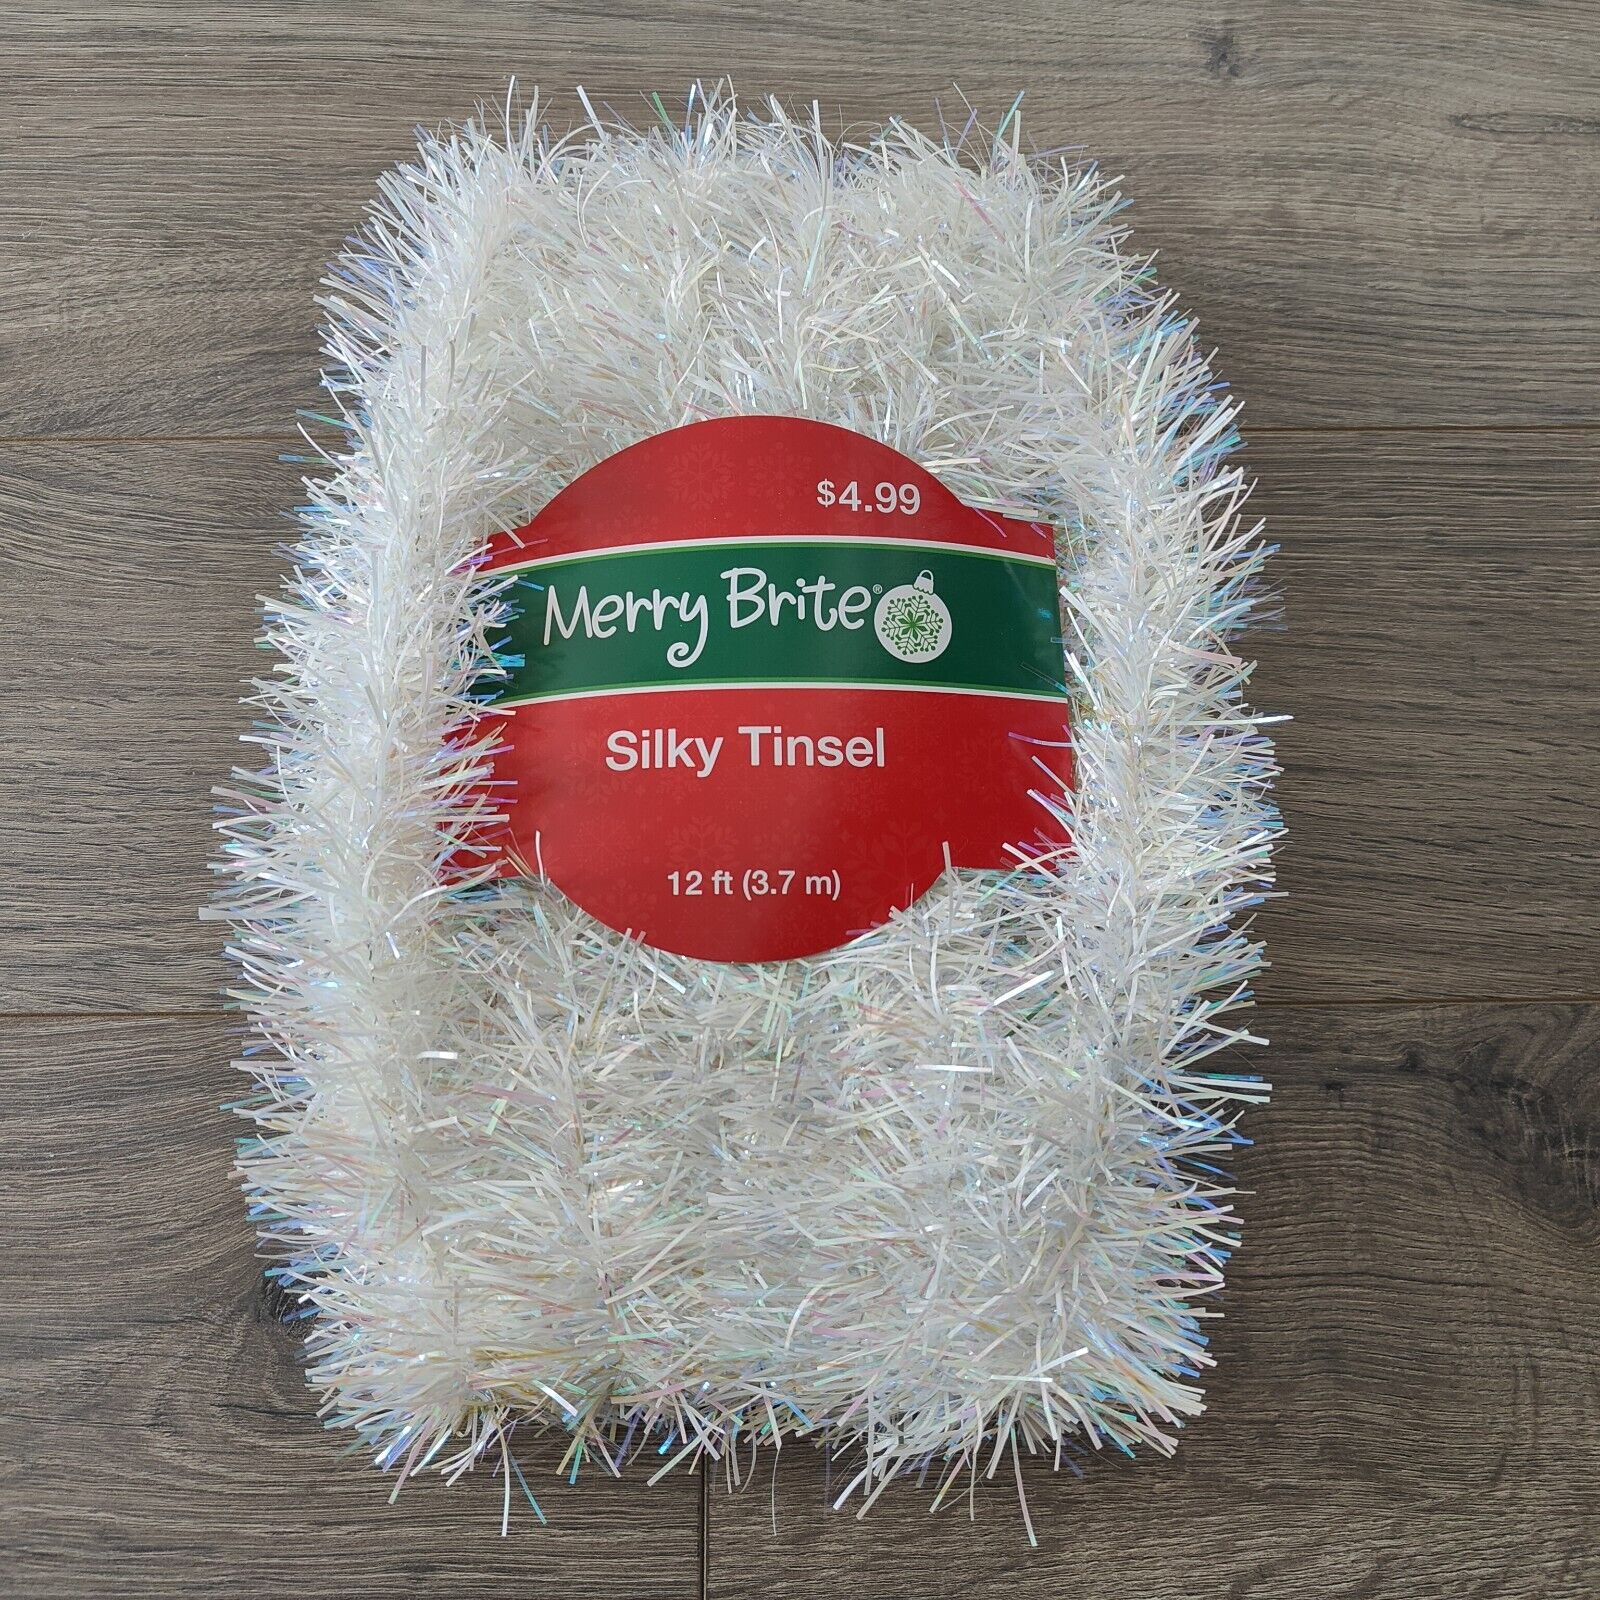 Merry Brite White Pearlized Tinsel Garland 12 ft Silky Holiday Decor Christmas